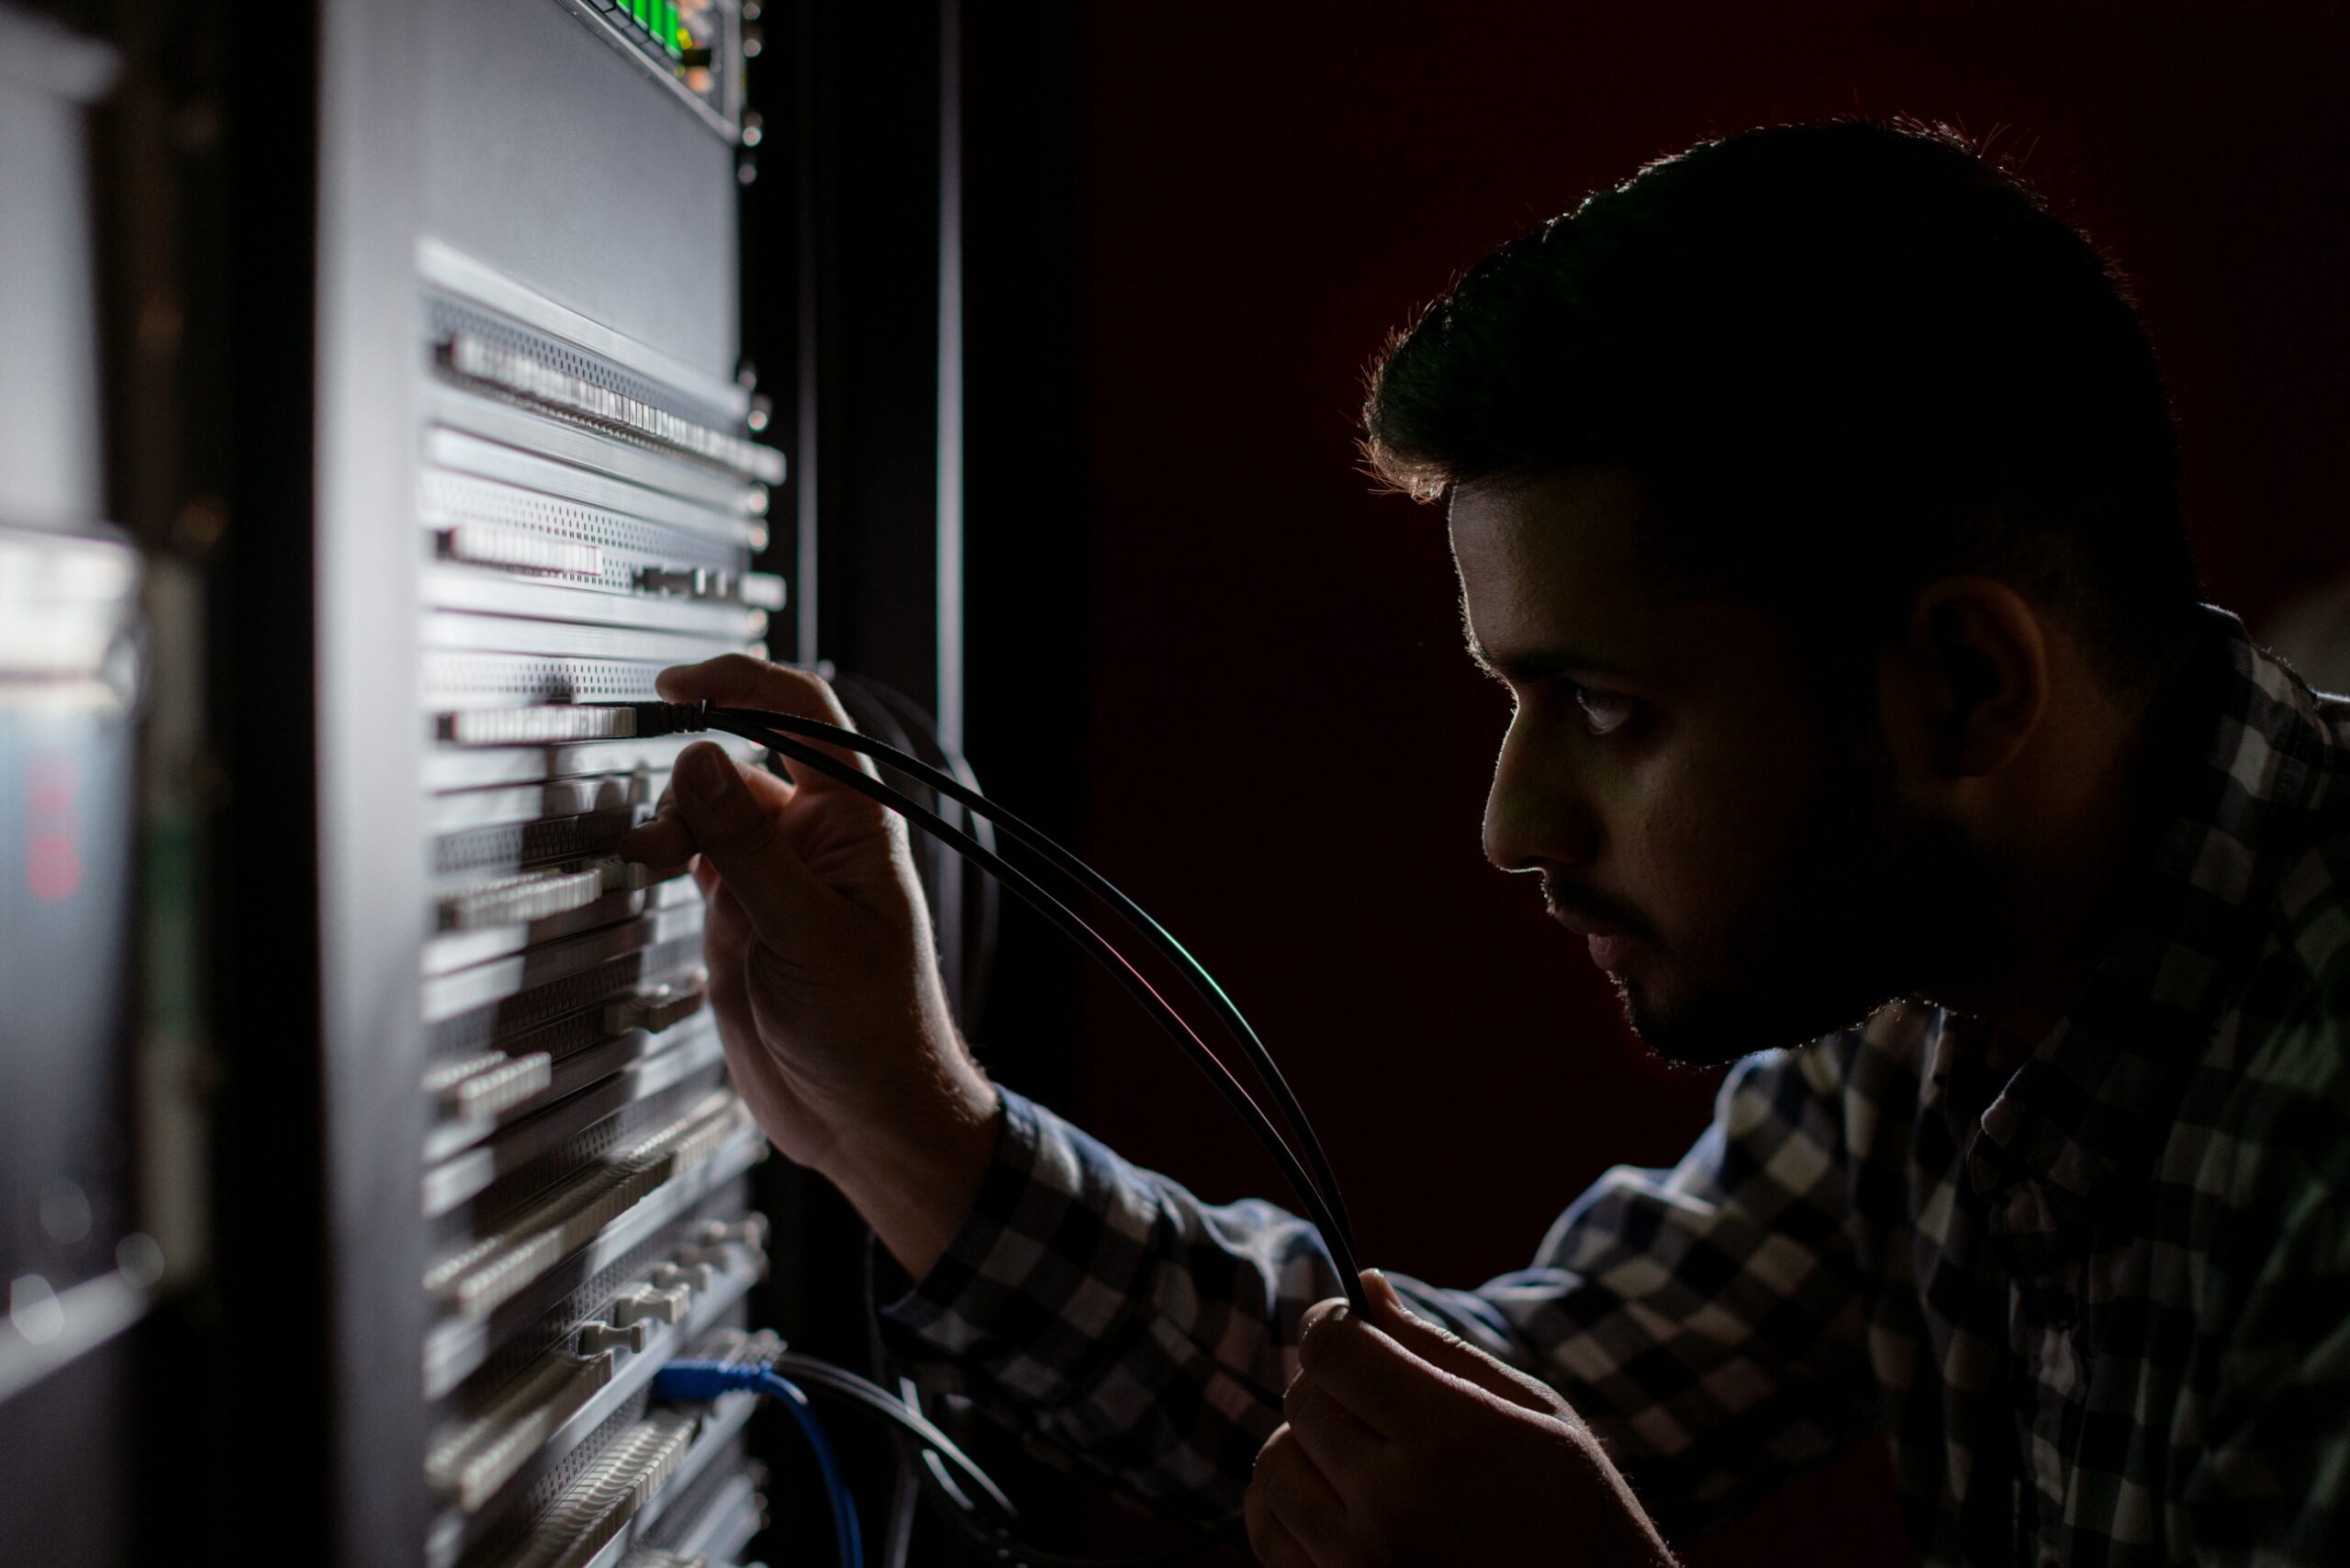 A man is working on a server in a dark room, optimizing network infrastructure.